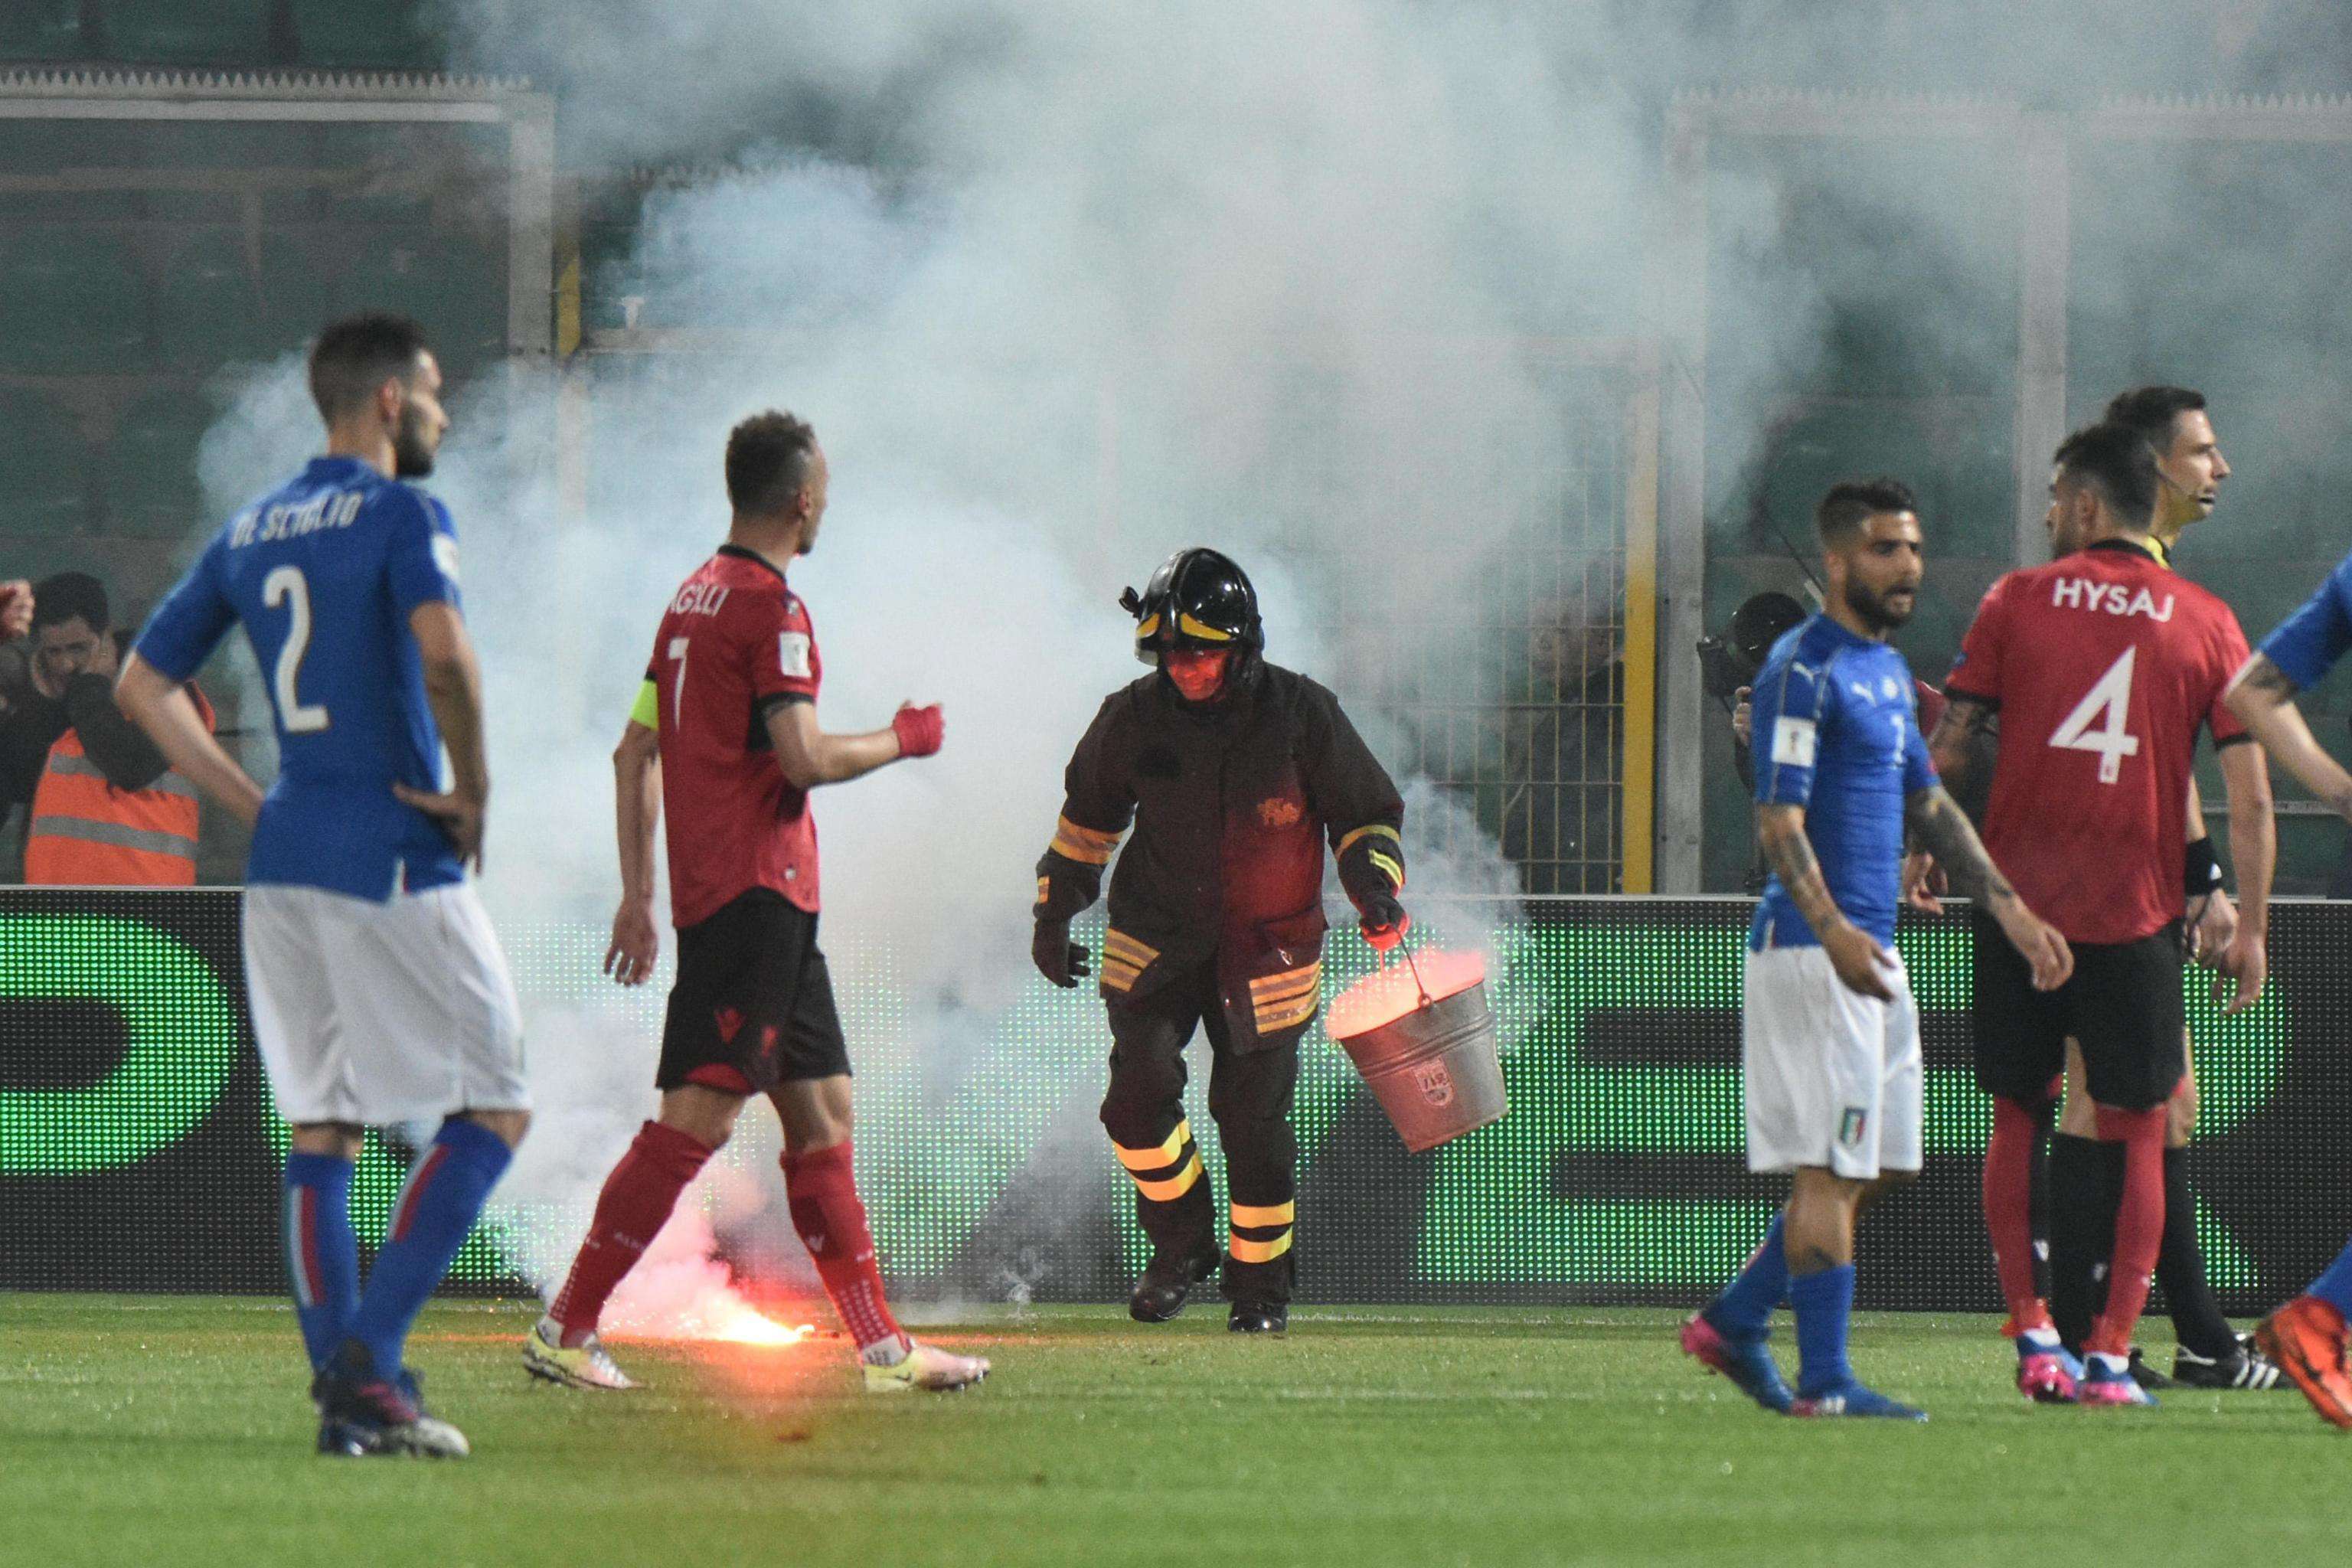 A fireman tries to clear the pitch. Photo: EPA